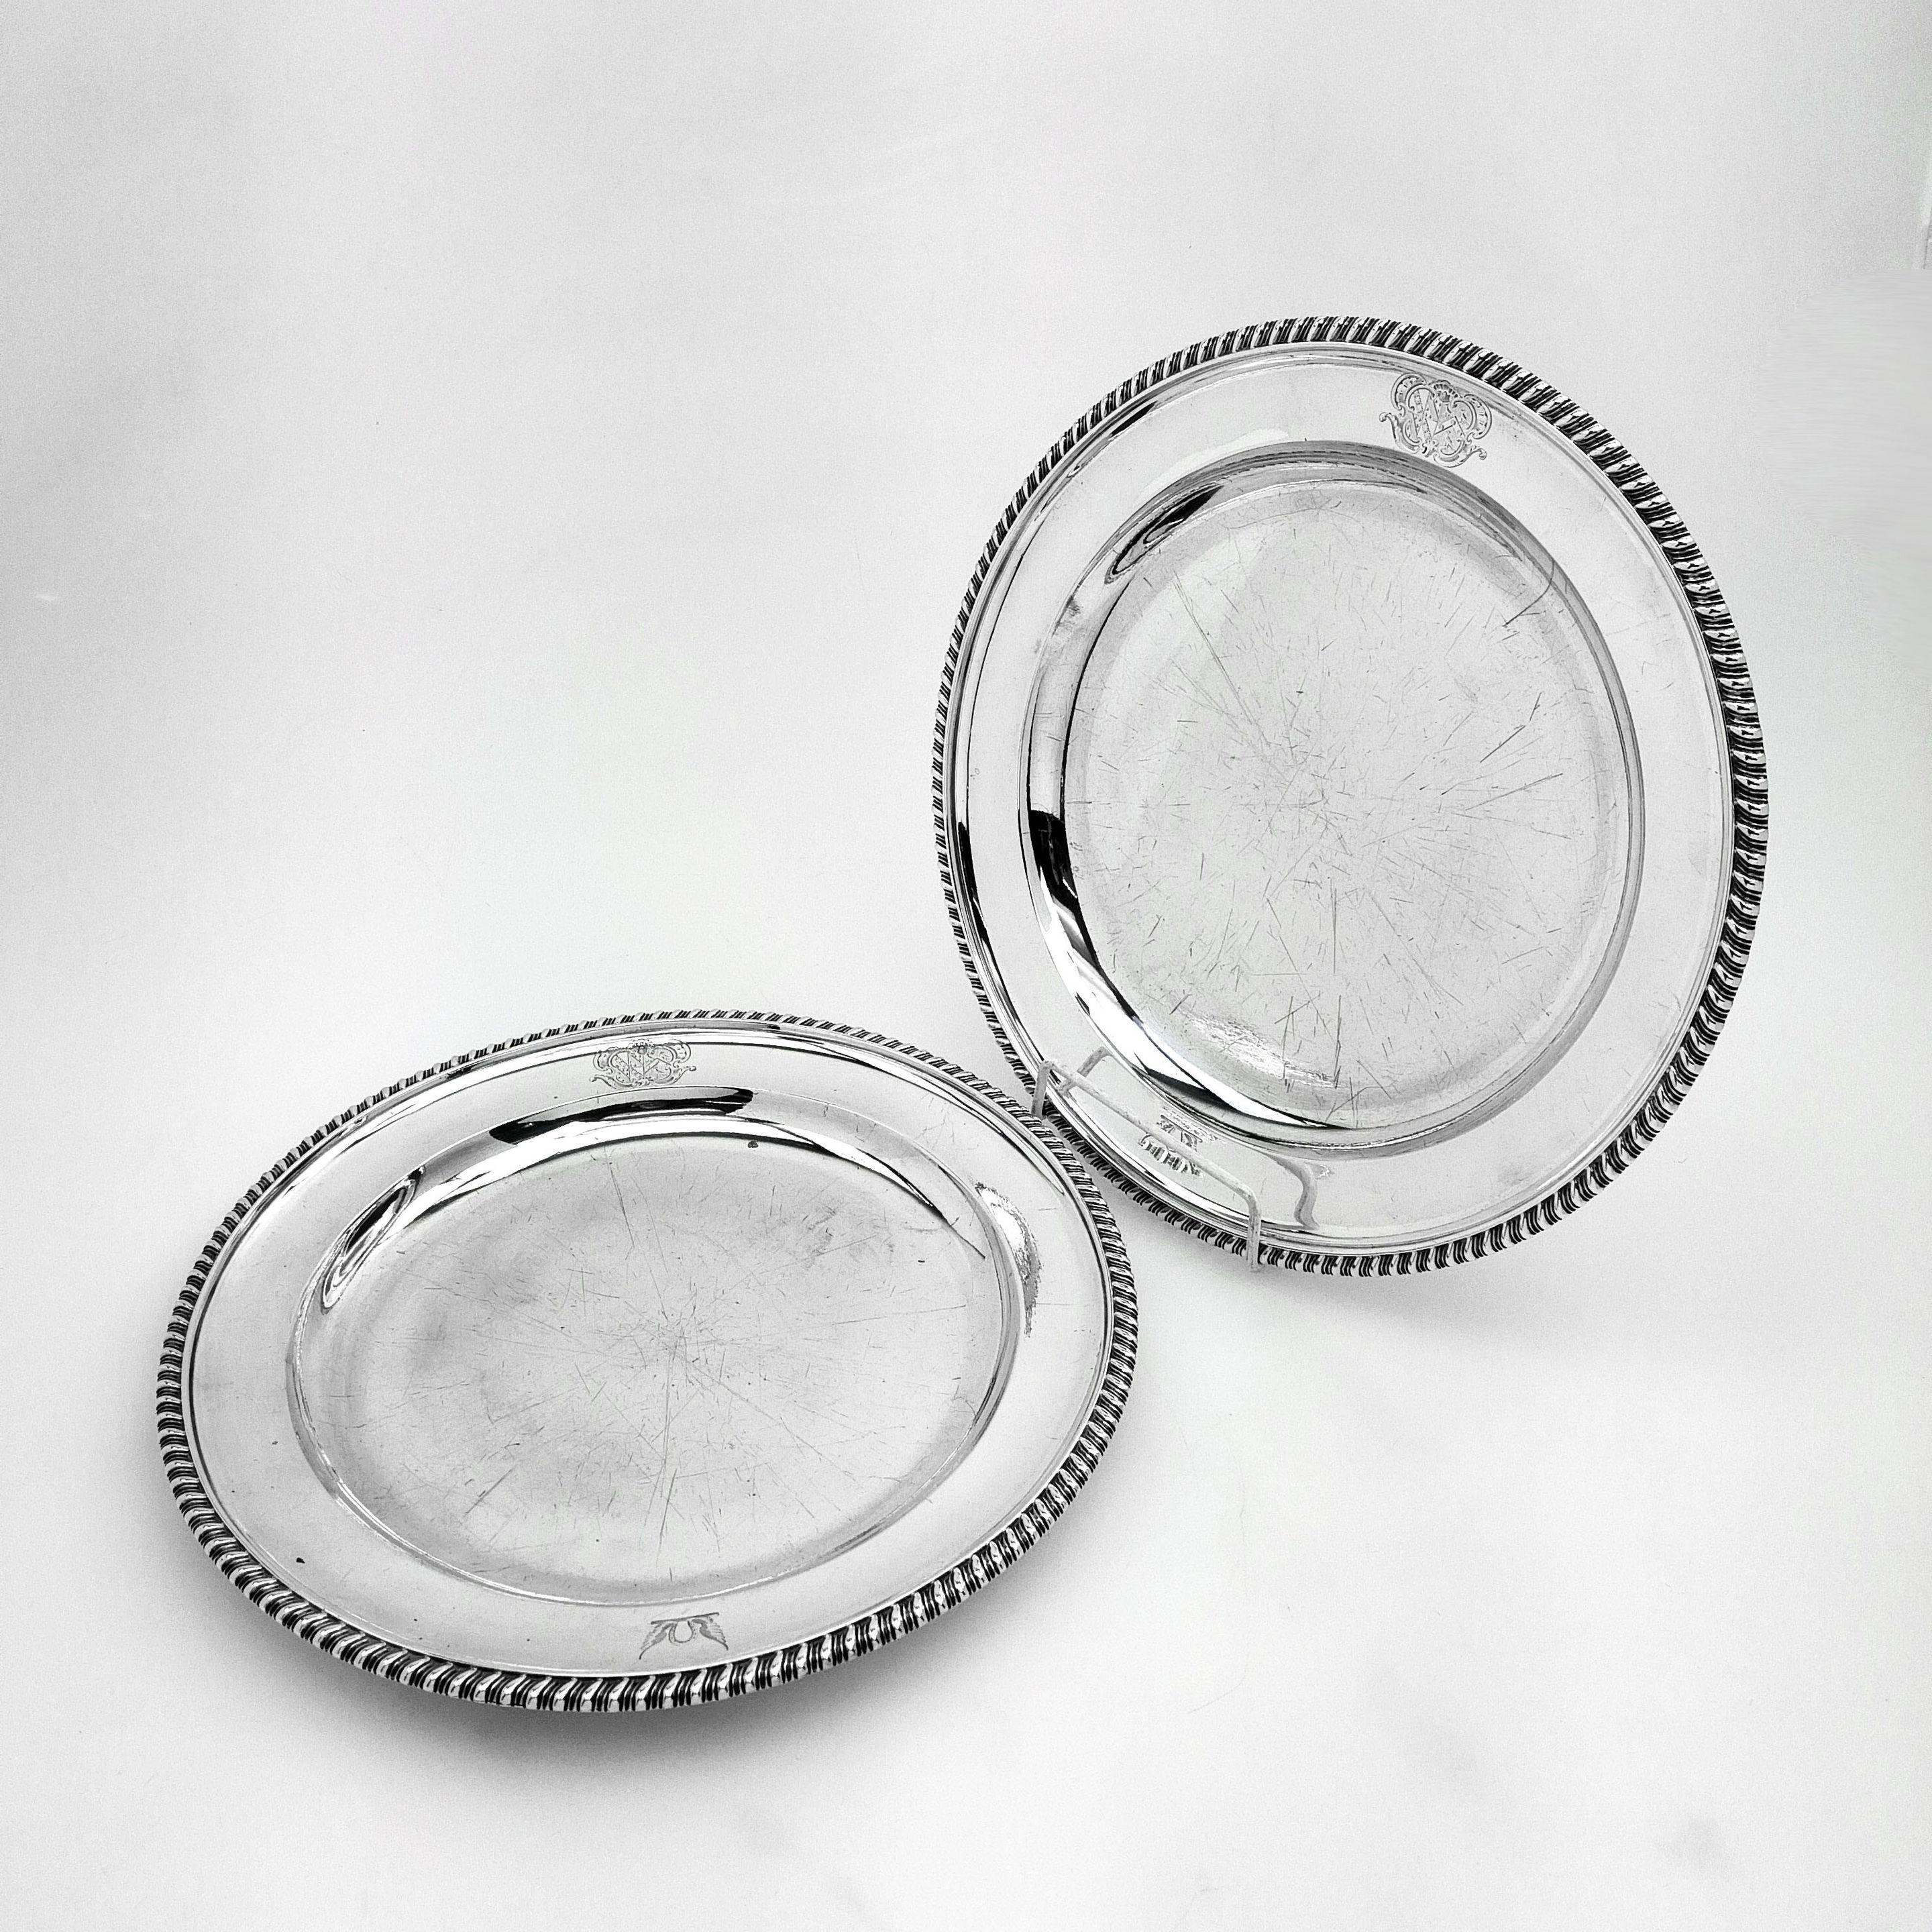 A pair of classic Antique Georgian solid Silver Second Course Dishes / Plates with a classic gadroon border. Each Dish has a pair of crests engraved one on each side of the rim on each plate.
 
 Made in London in 1823 by William Eley.
 
 Approx.